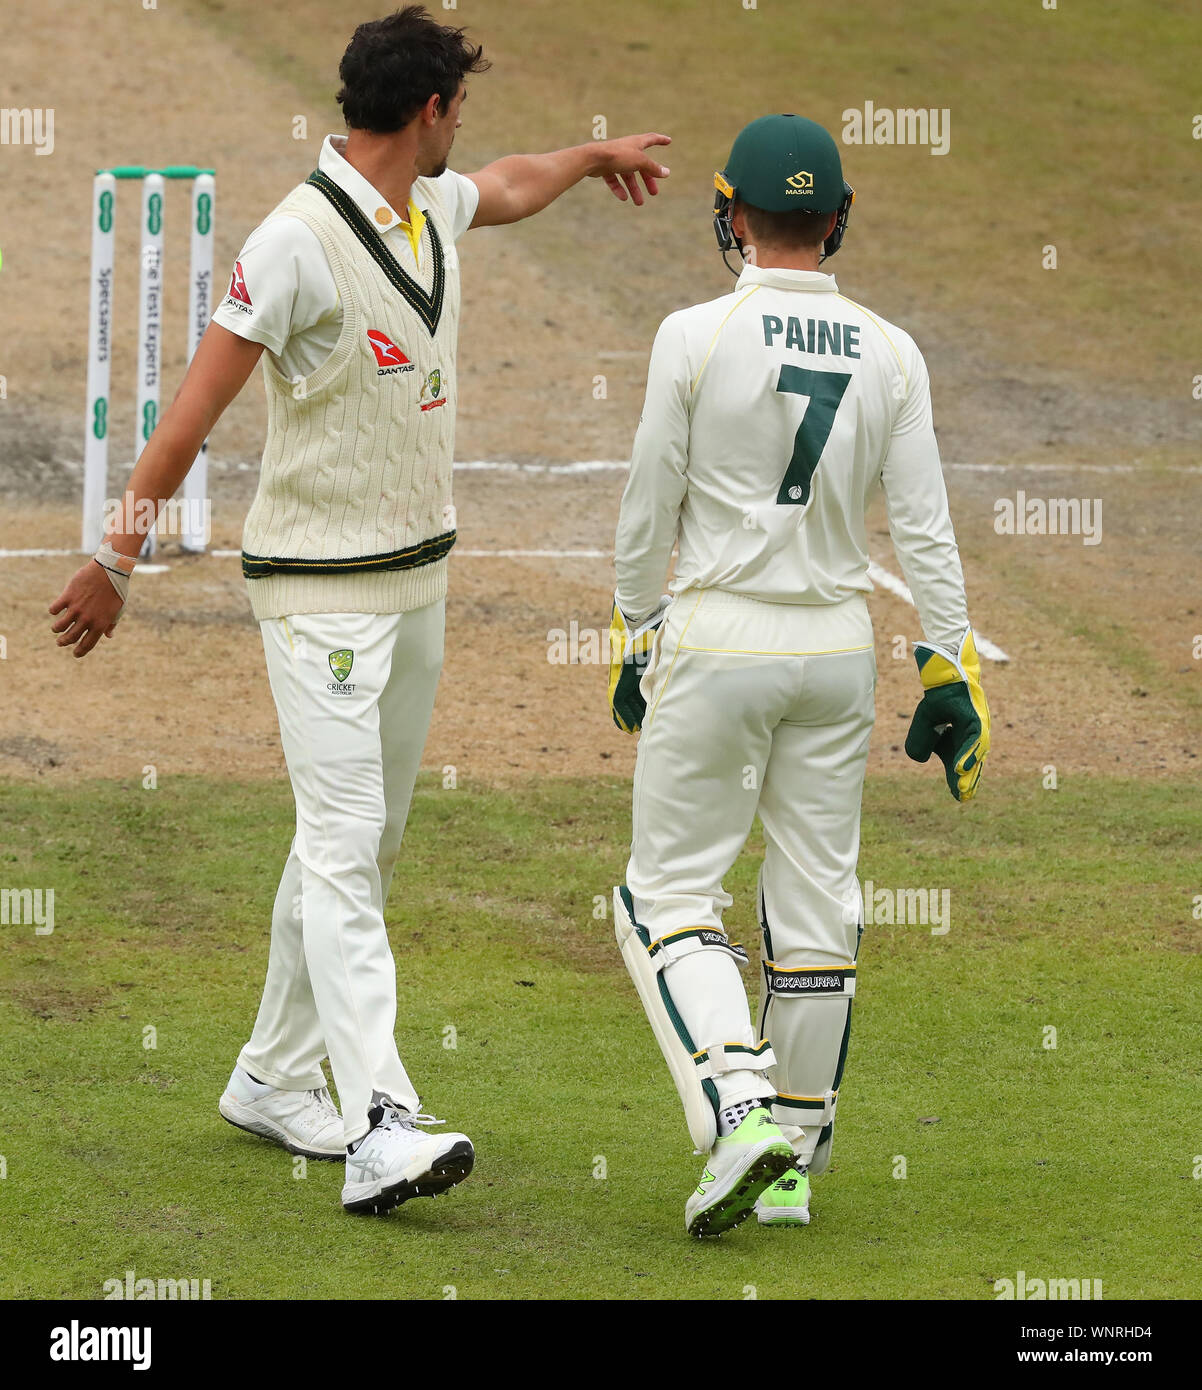 Manchester, UK. 06th Sep, 2019. Mitchell Starc and Tim Paine of Australia discuss field placings during day three of the 4th Specsavers Ashes Test Match, at Old Trafford Cricket Ground, Manchester, England. Credit: ESPA/Alamy Live News Stock Photo